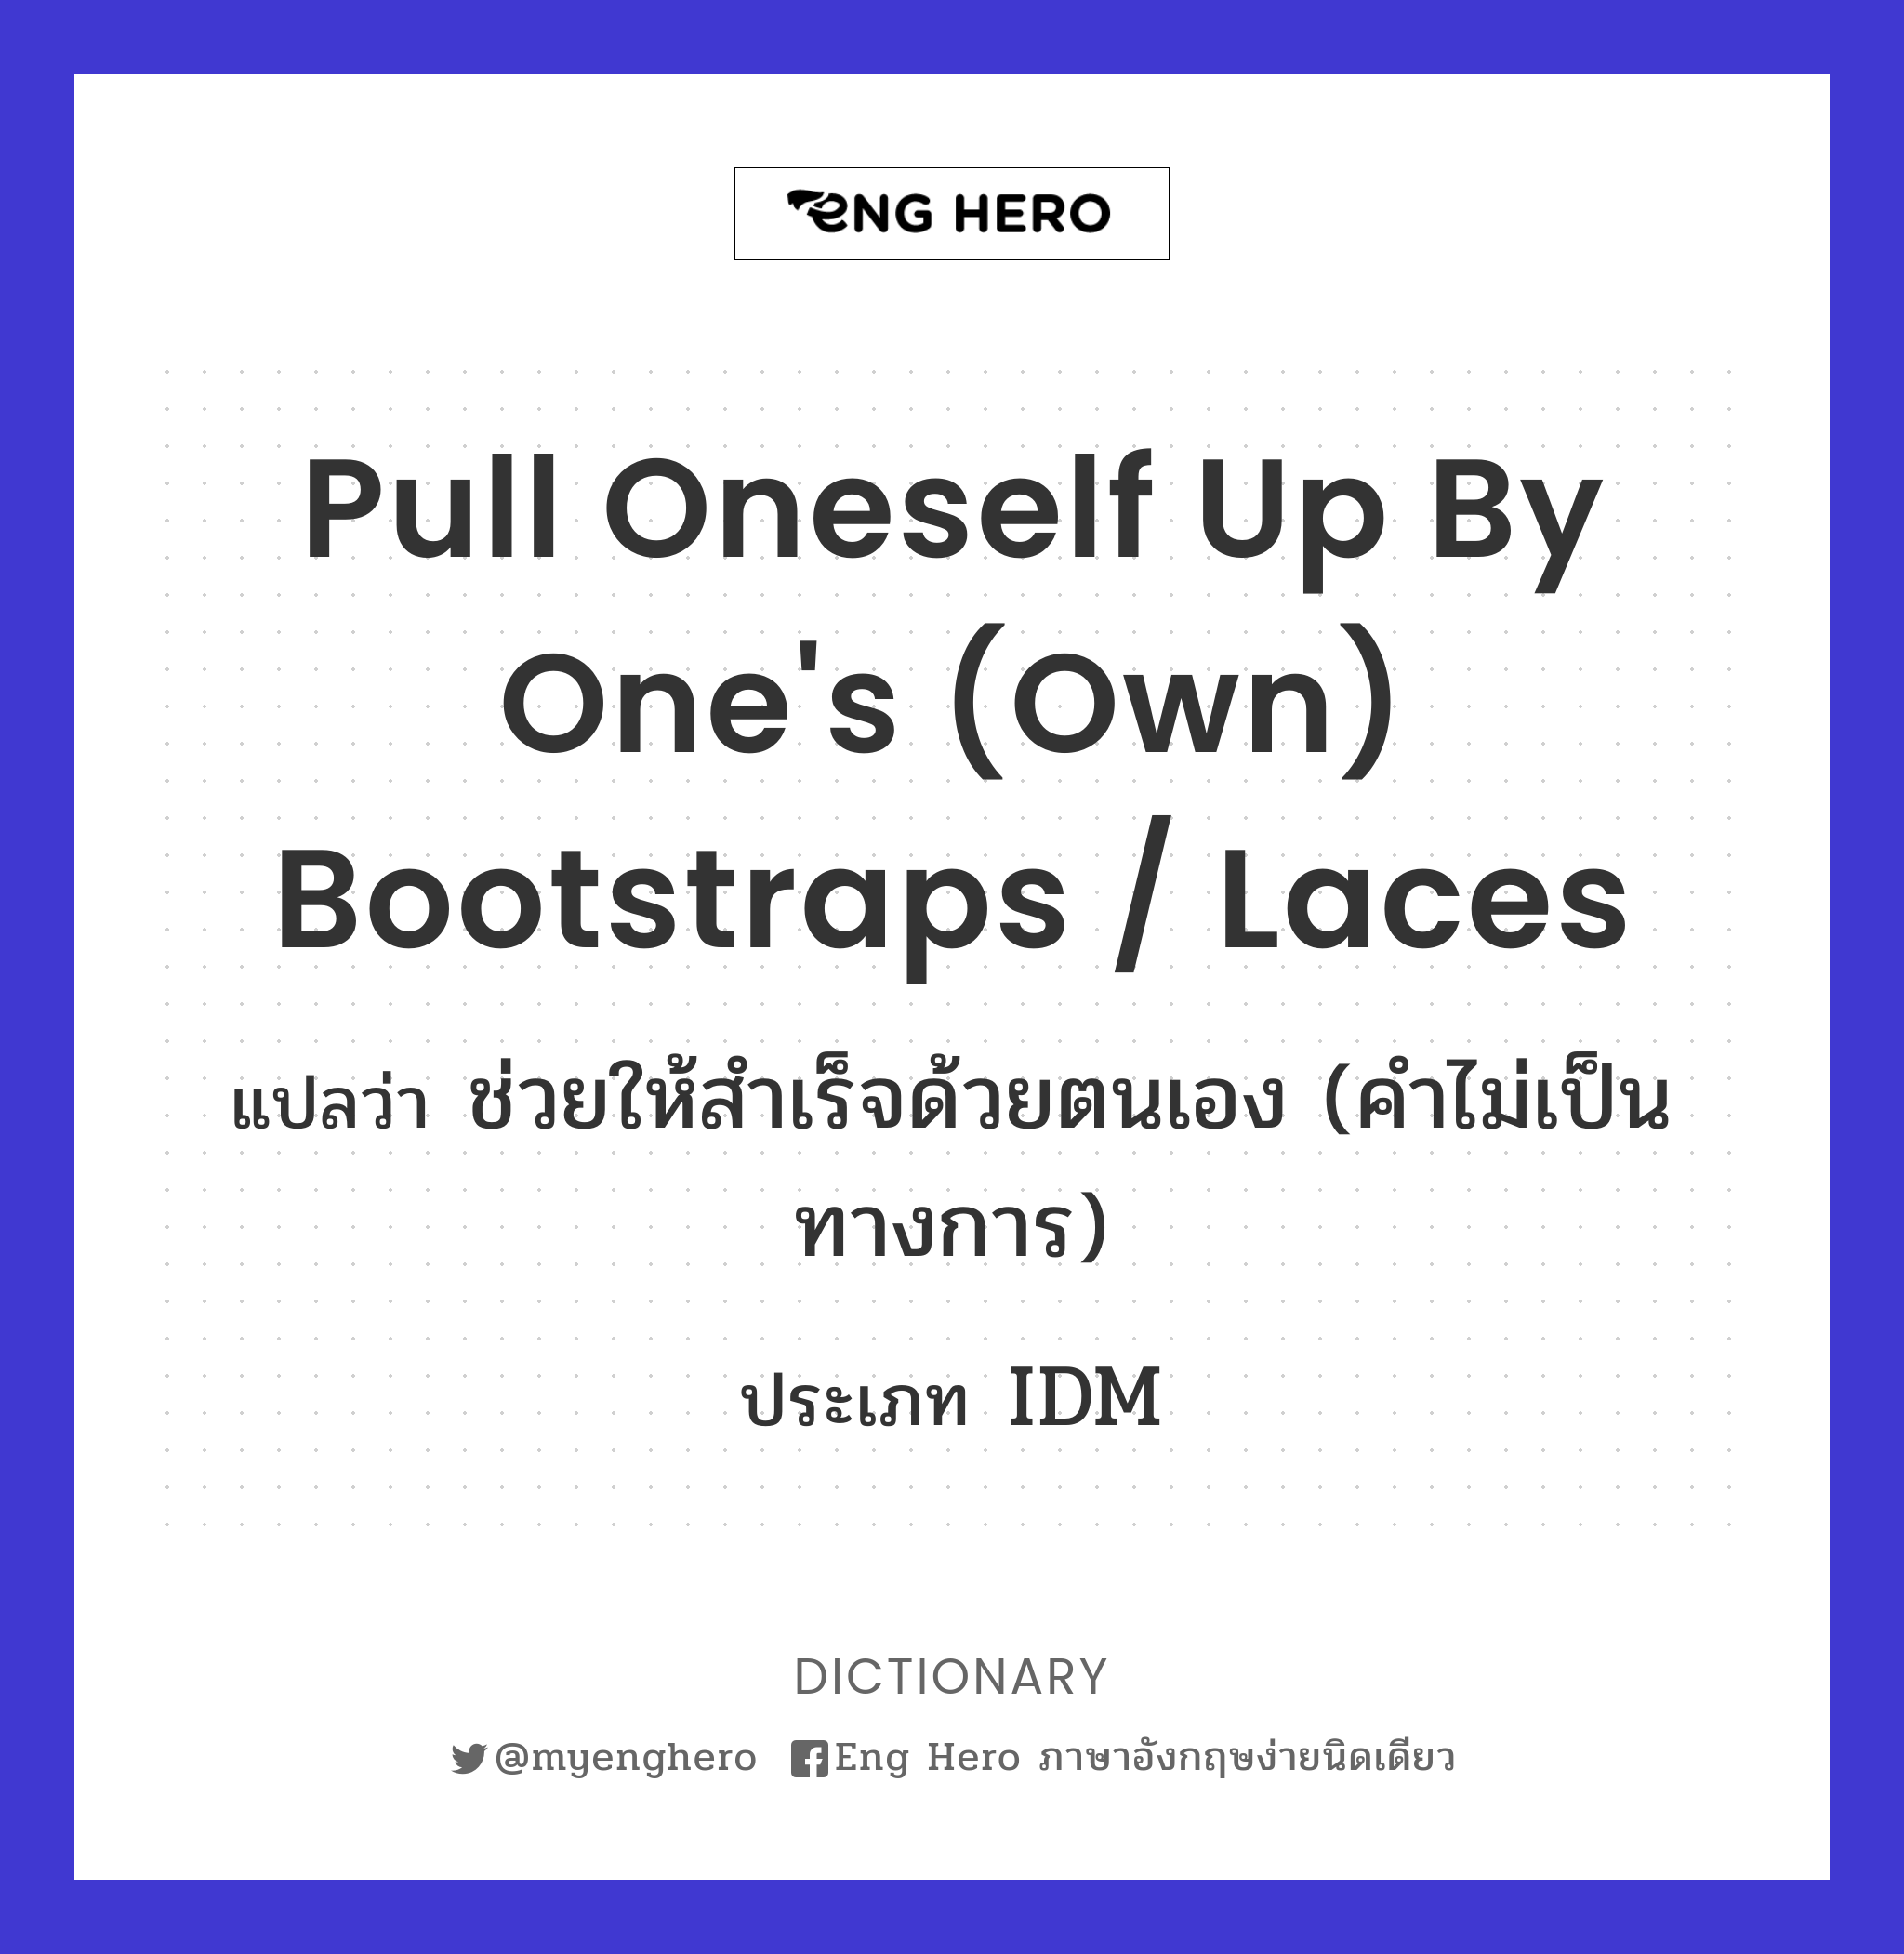 pull oneself up by one's (own) bootstraps / laces